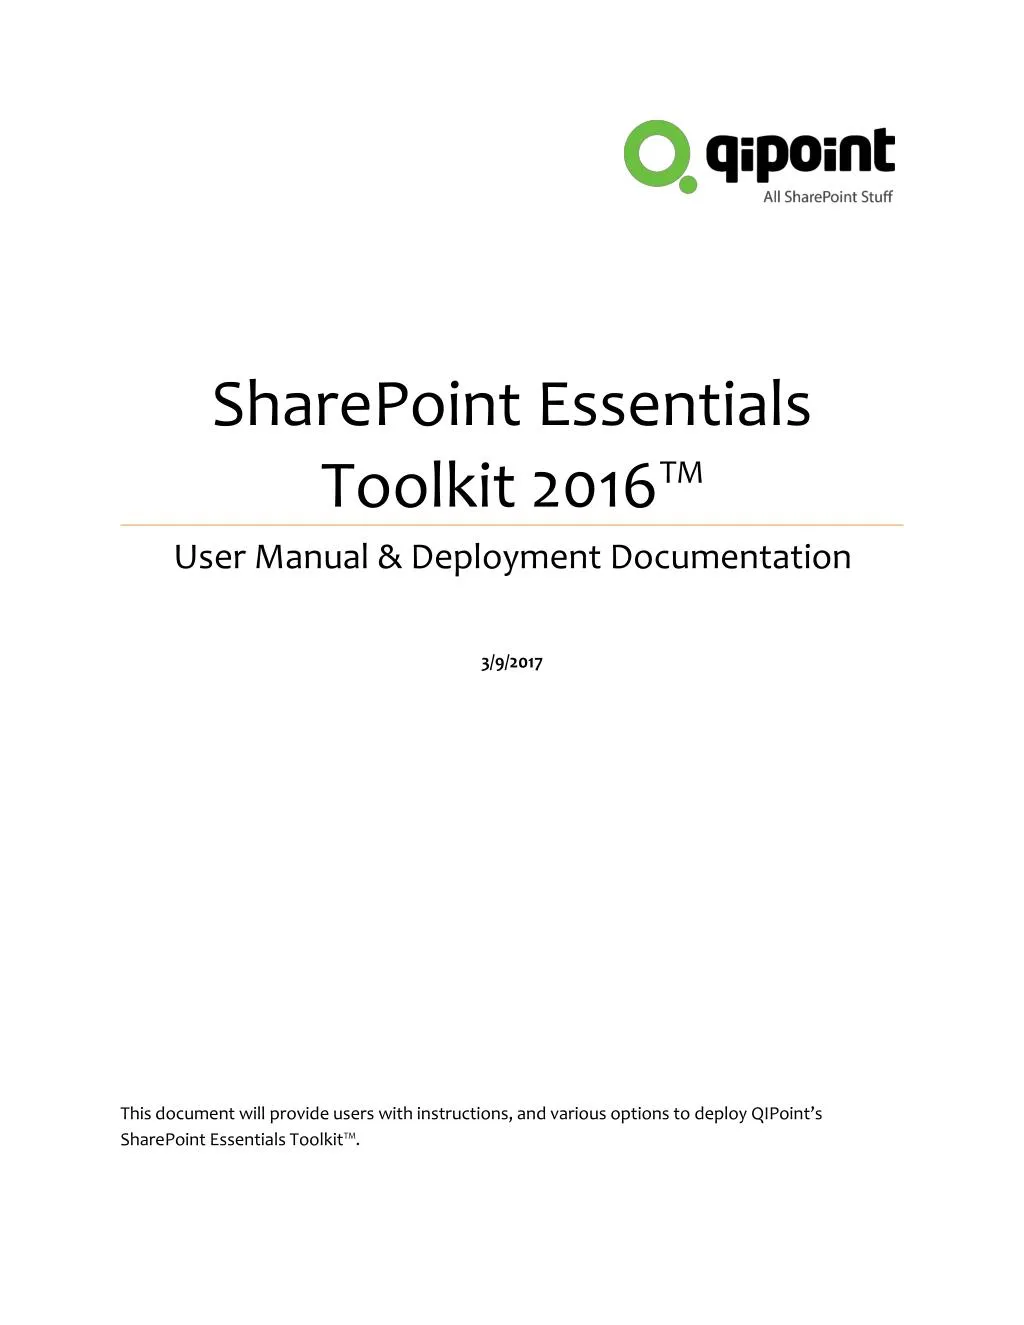 sharepoint essentials toolkit 2016 user manual